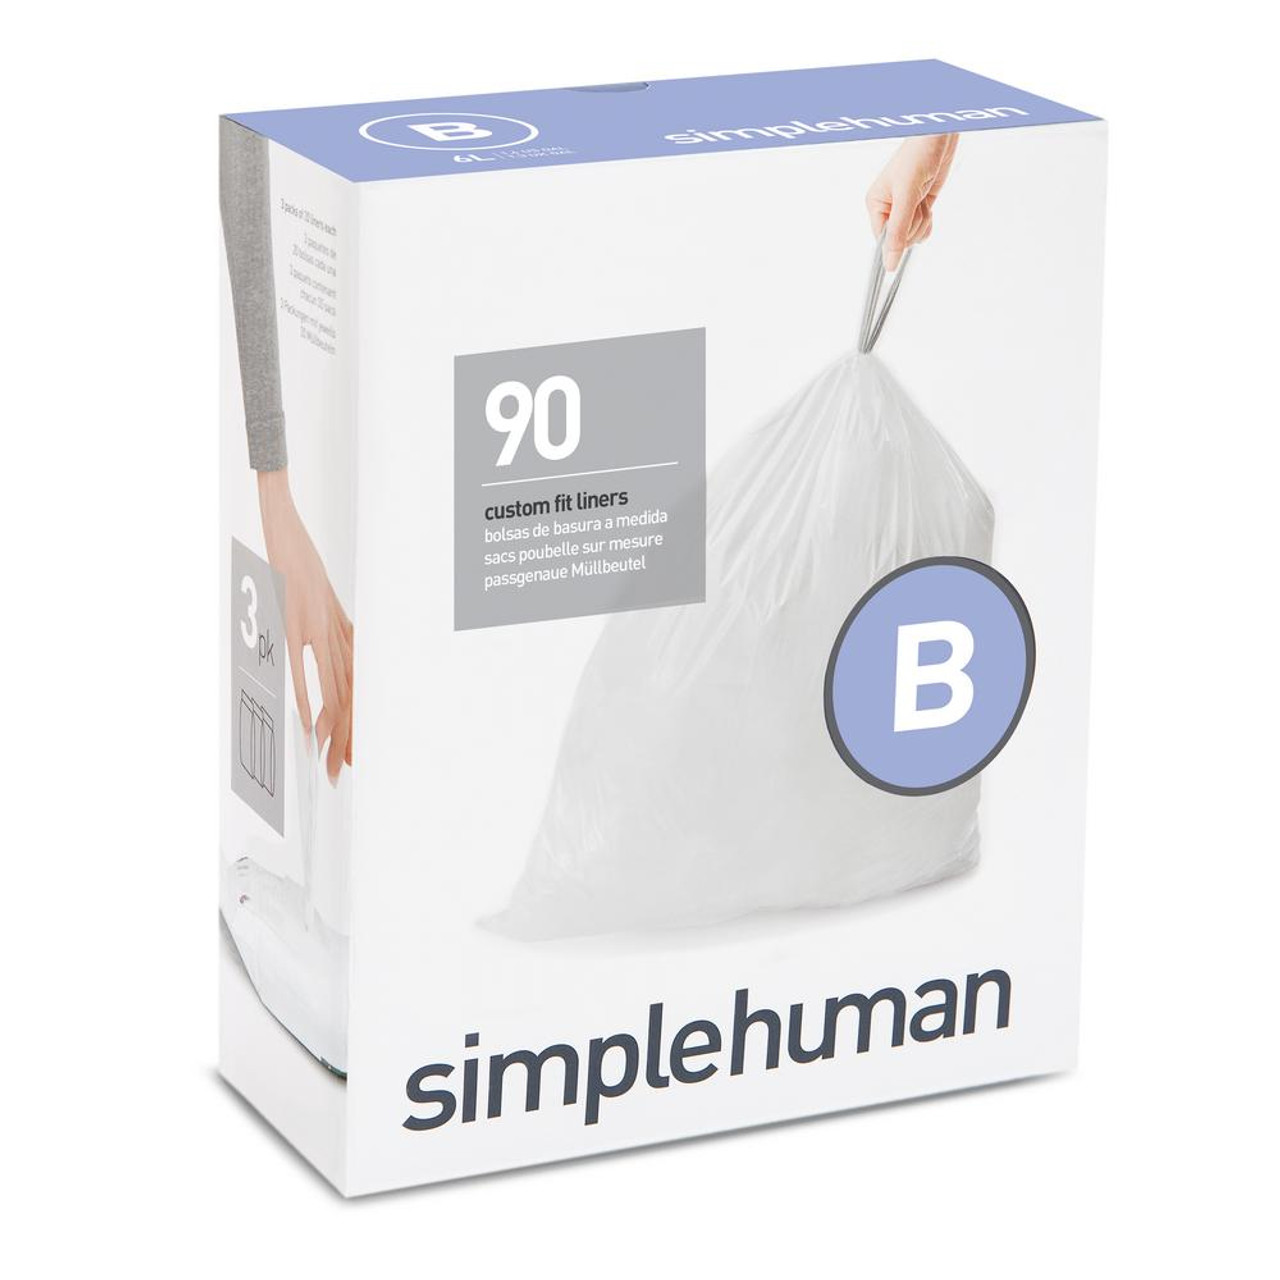 https://cdn11.bigcommerce.com/s-24aaq2uf1m/images/stencil/1280x1280/products/2852/1689/simplehuman-garbage-bags-cw0251-64_1000__24126.1693841844.jpg?c=2